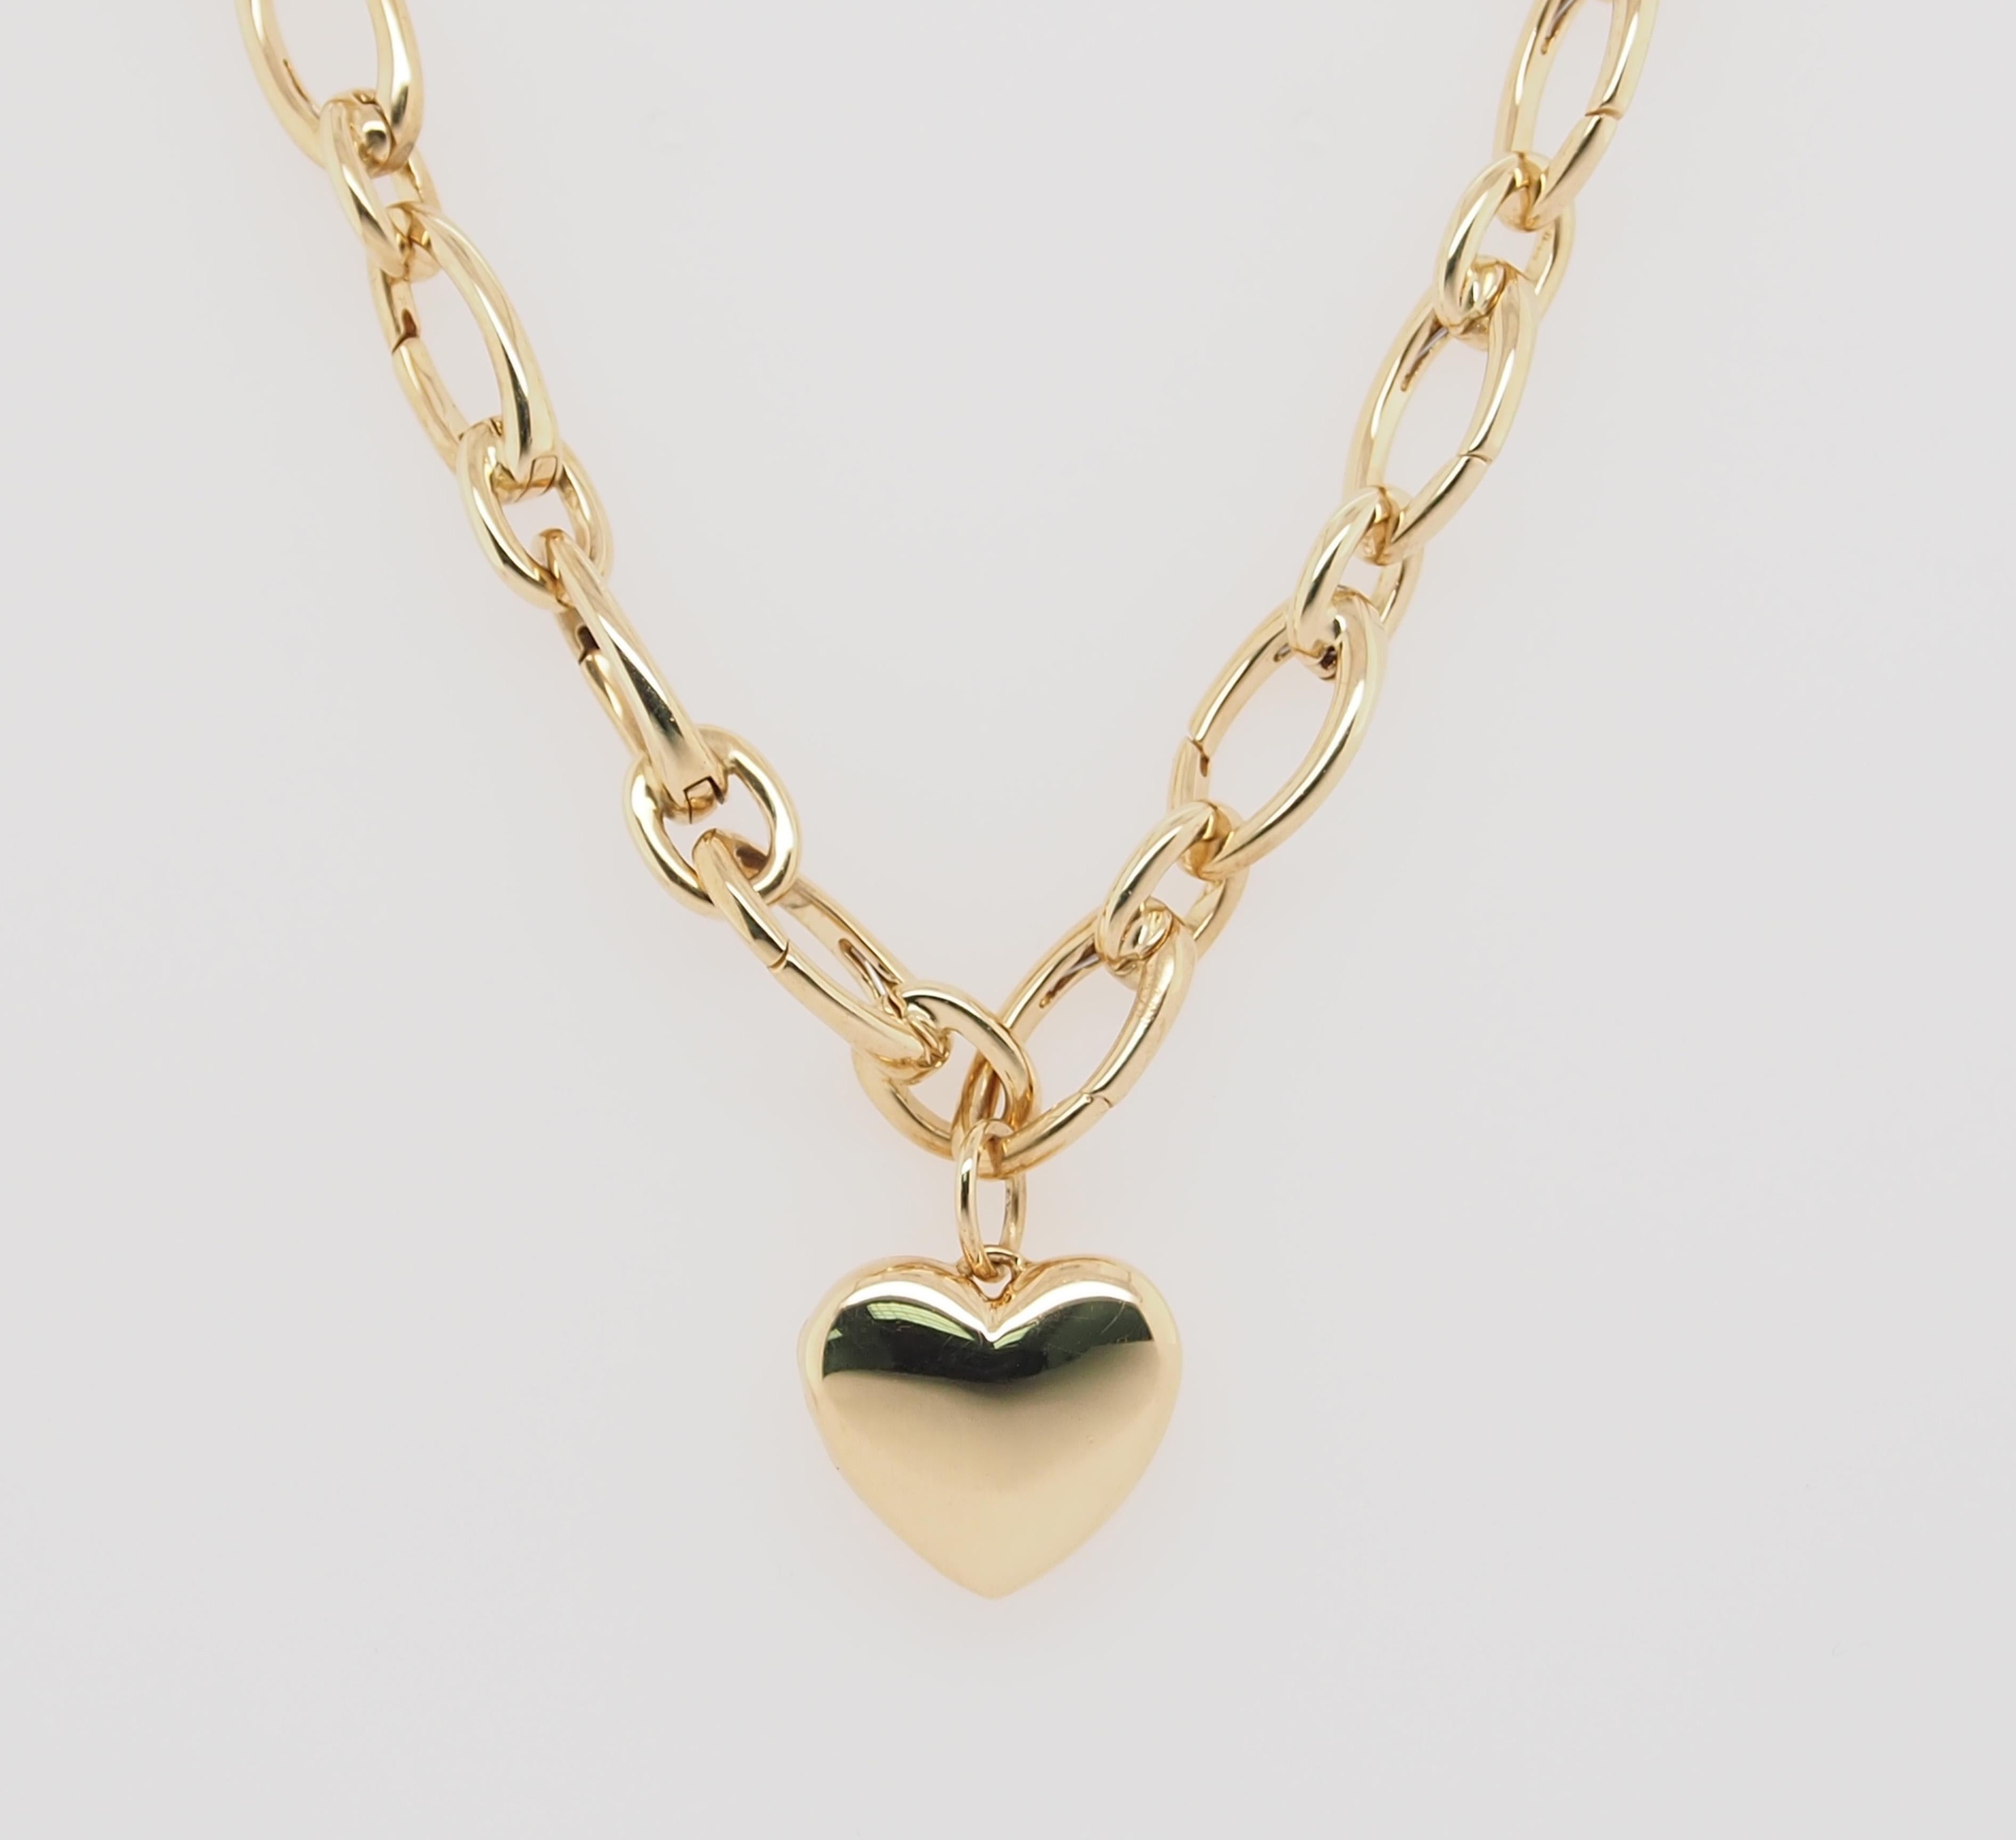 Tiffany and Co 18K yellow gold Heart Locket on a 14